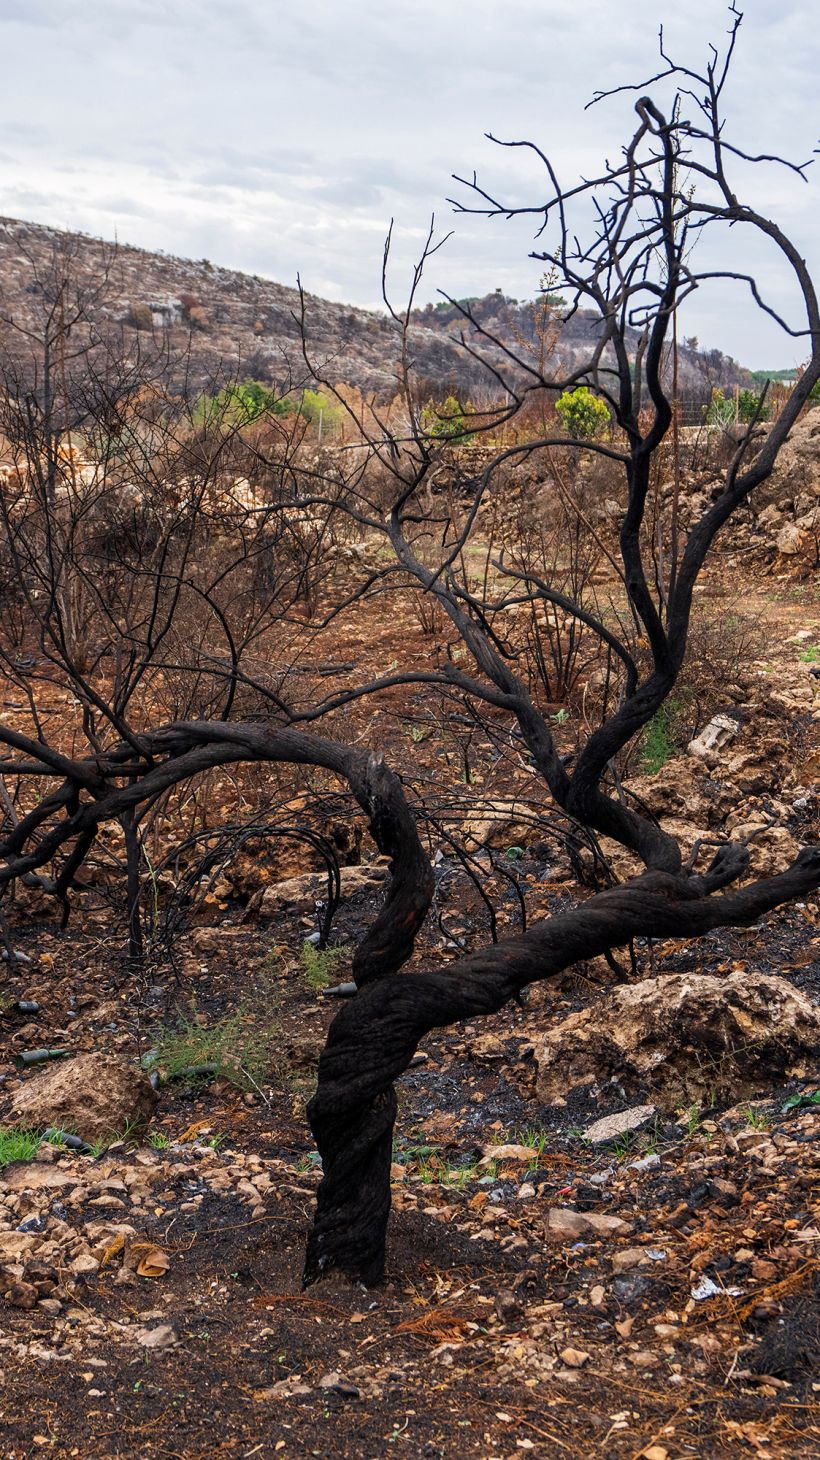 Burnt trees that local residents say were hit by white phosphorus shells from Israeli artillery are seen in Alma al-Shaab border village with Israel, south Lebanon.